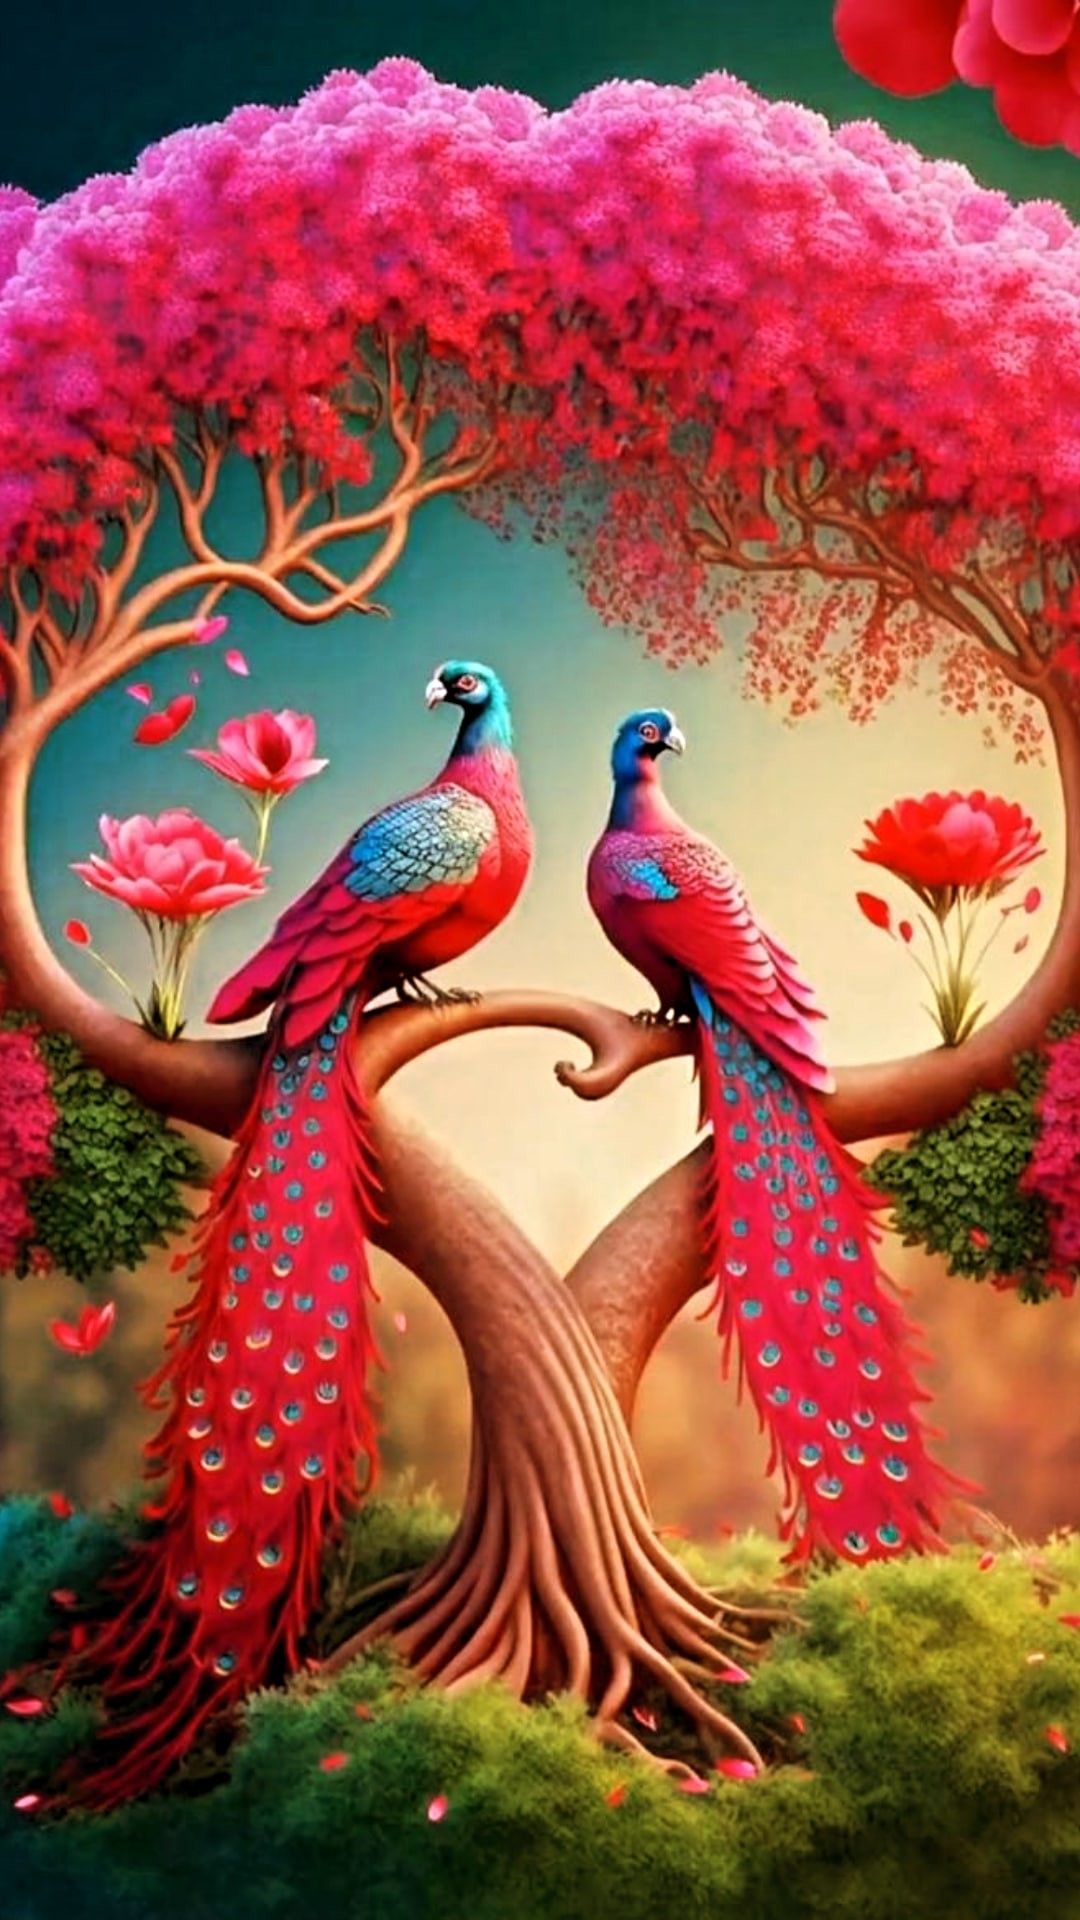 Two colorful peacocks on a tree branch wallpaper - Peacock